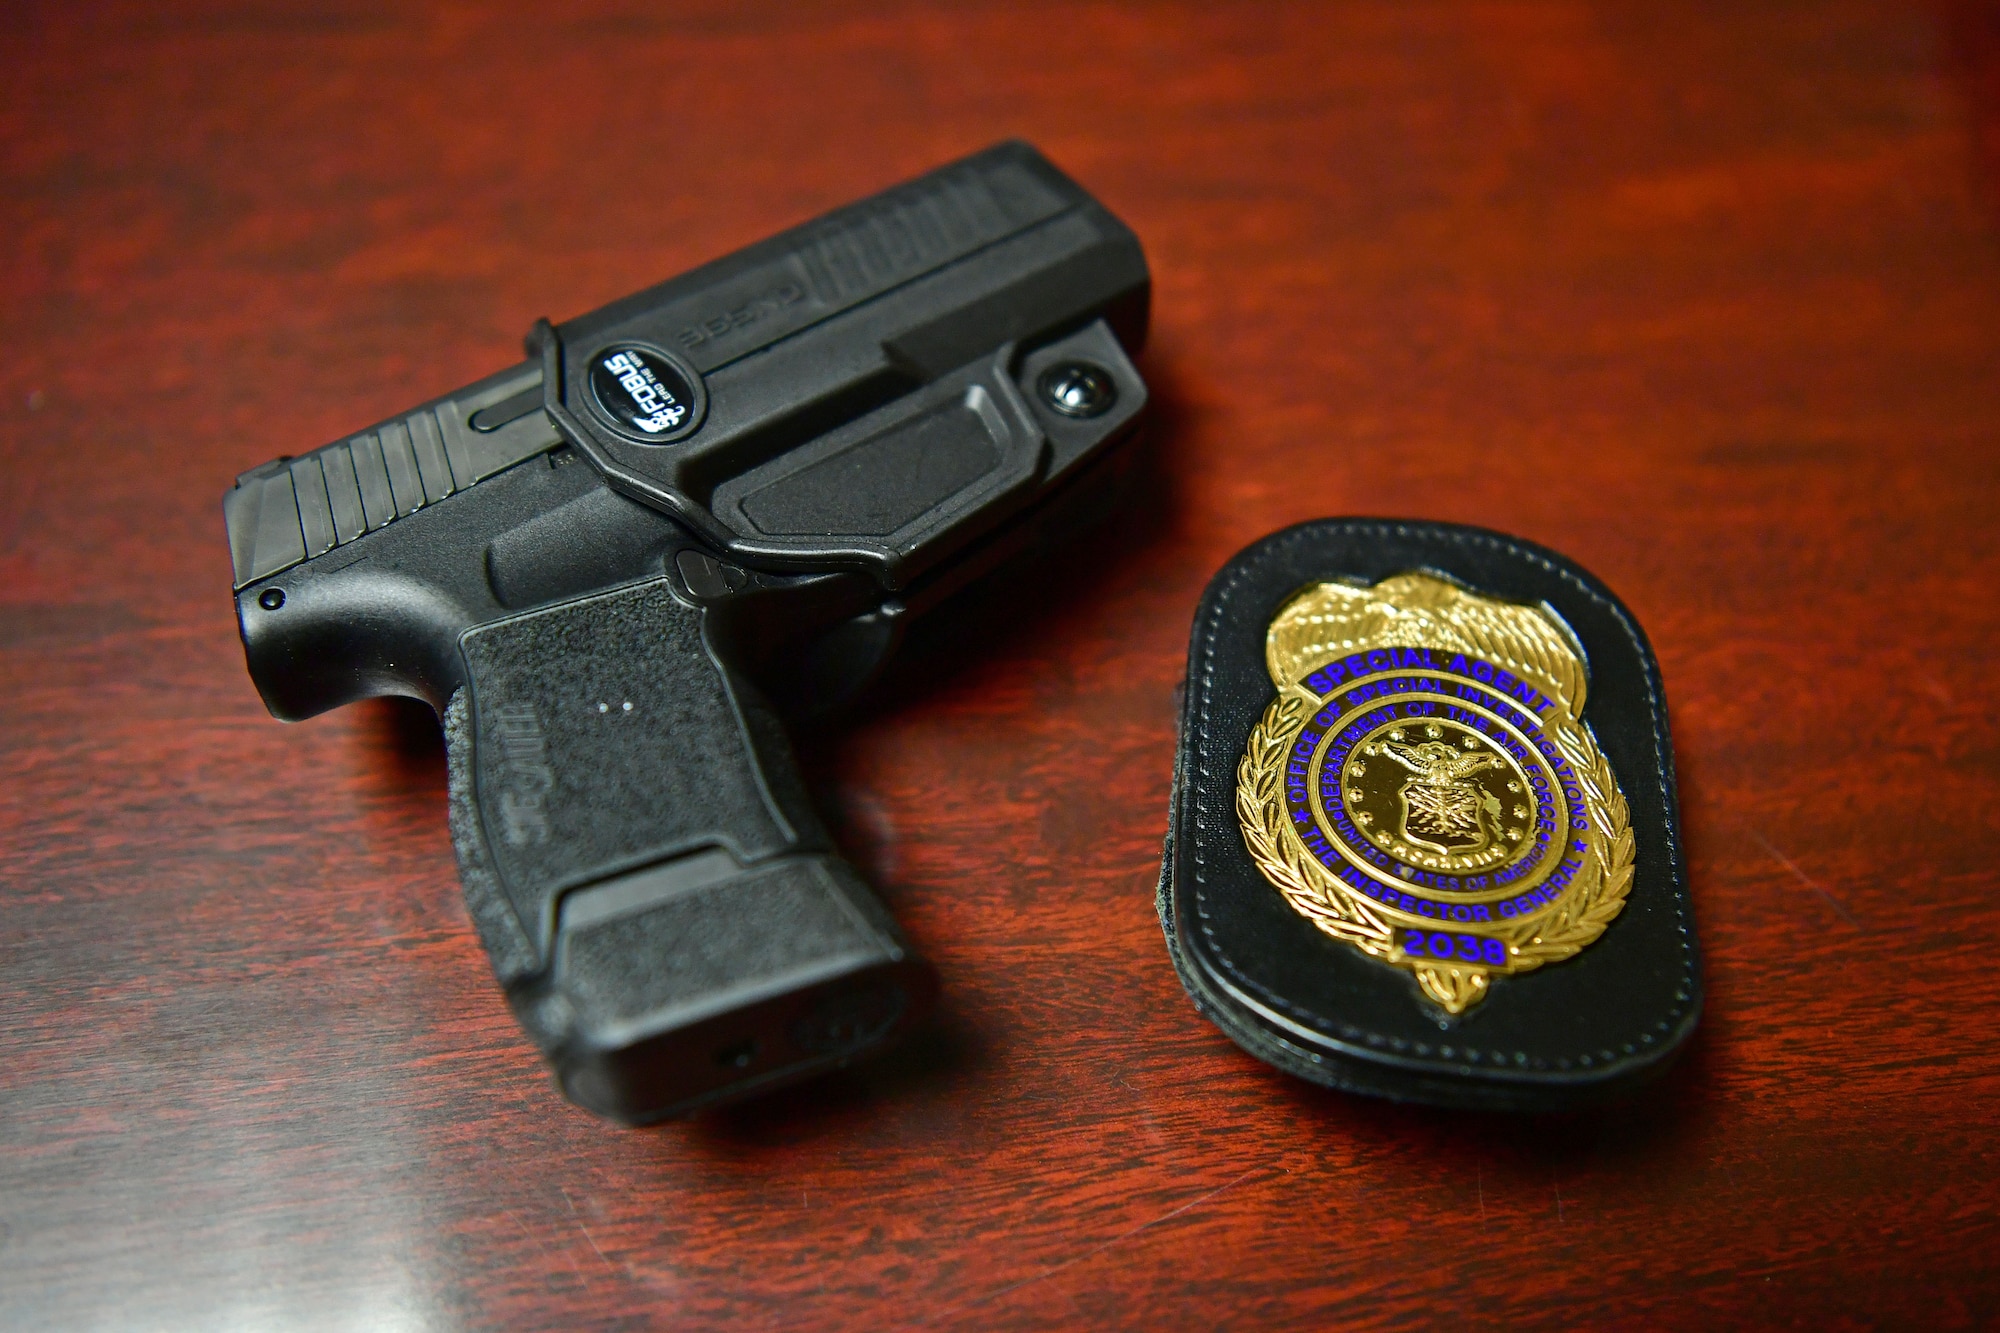 A photo of a pistol and an OSI badge on a table.